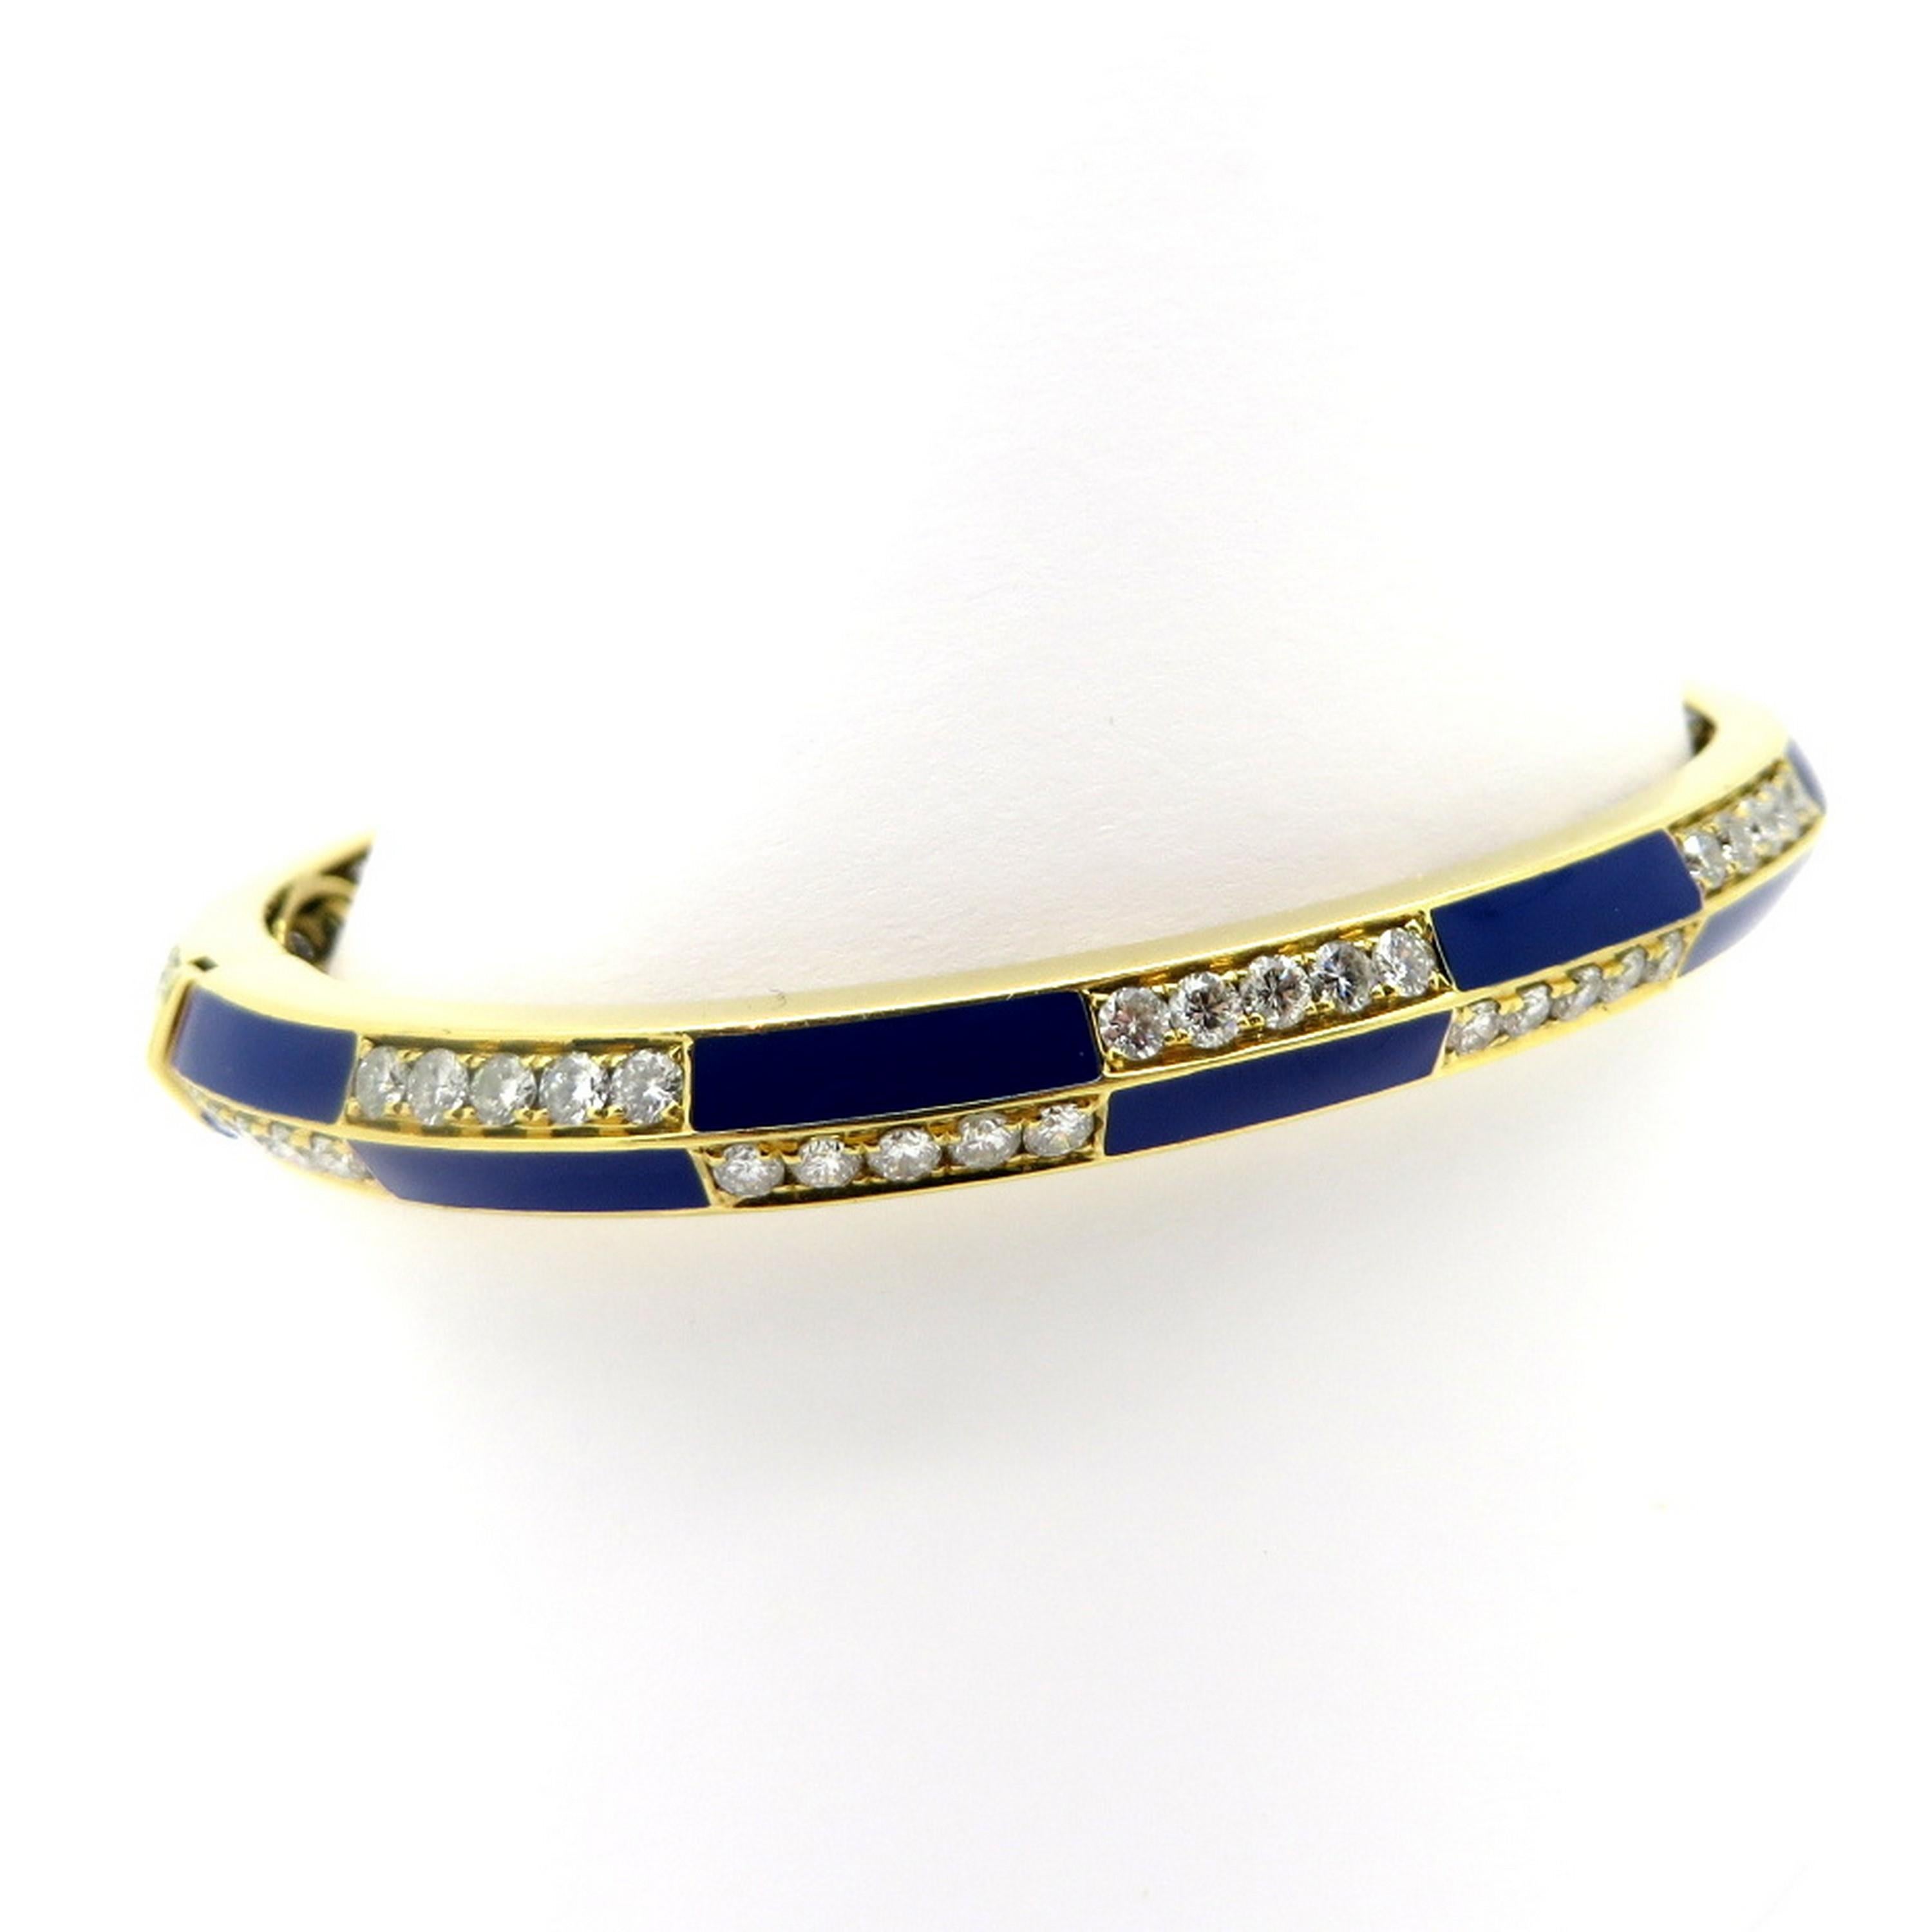 Estate 18K yellow gold 4.60 carat round diamond blue enamel bangle bracelet. Showcasing 77 round brilliant cut micro prong set diamonds weighing a combined total of approximately 3.72 carats. Diamond grading: color grade: G – H. Clarity grade: SI1.